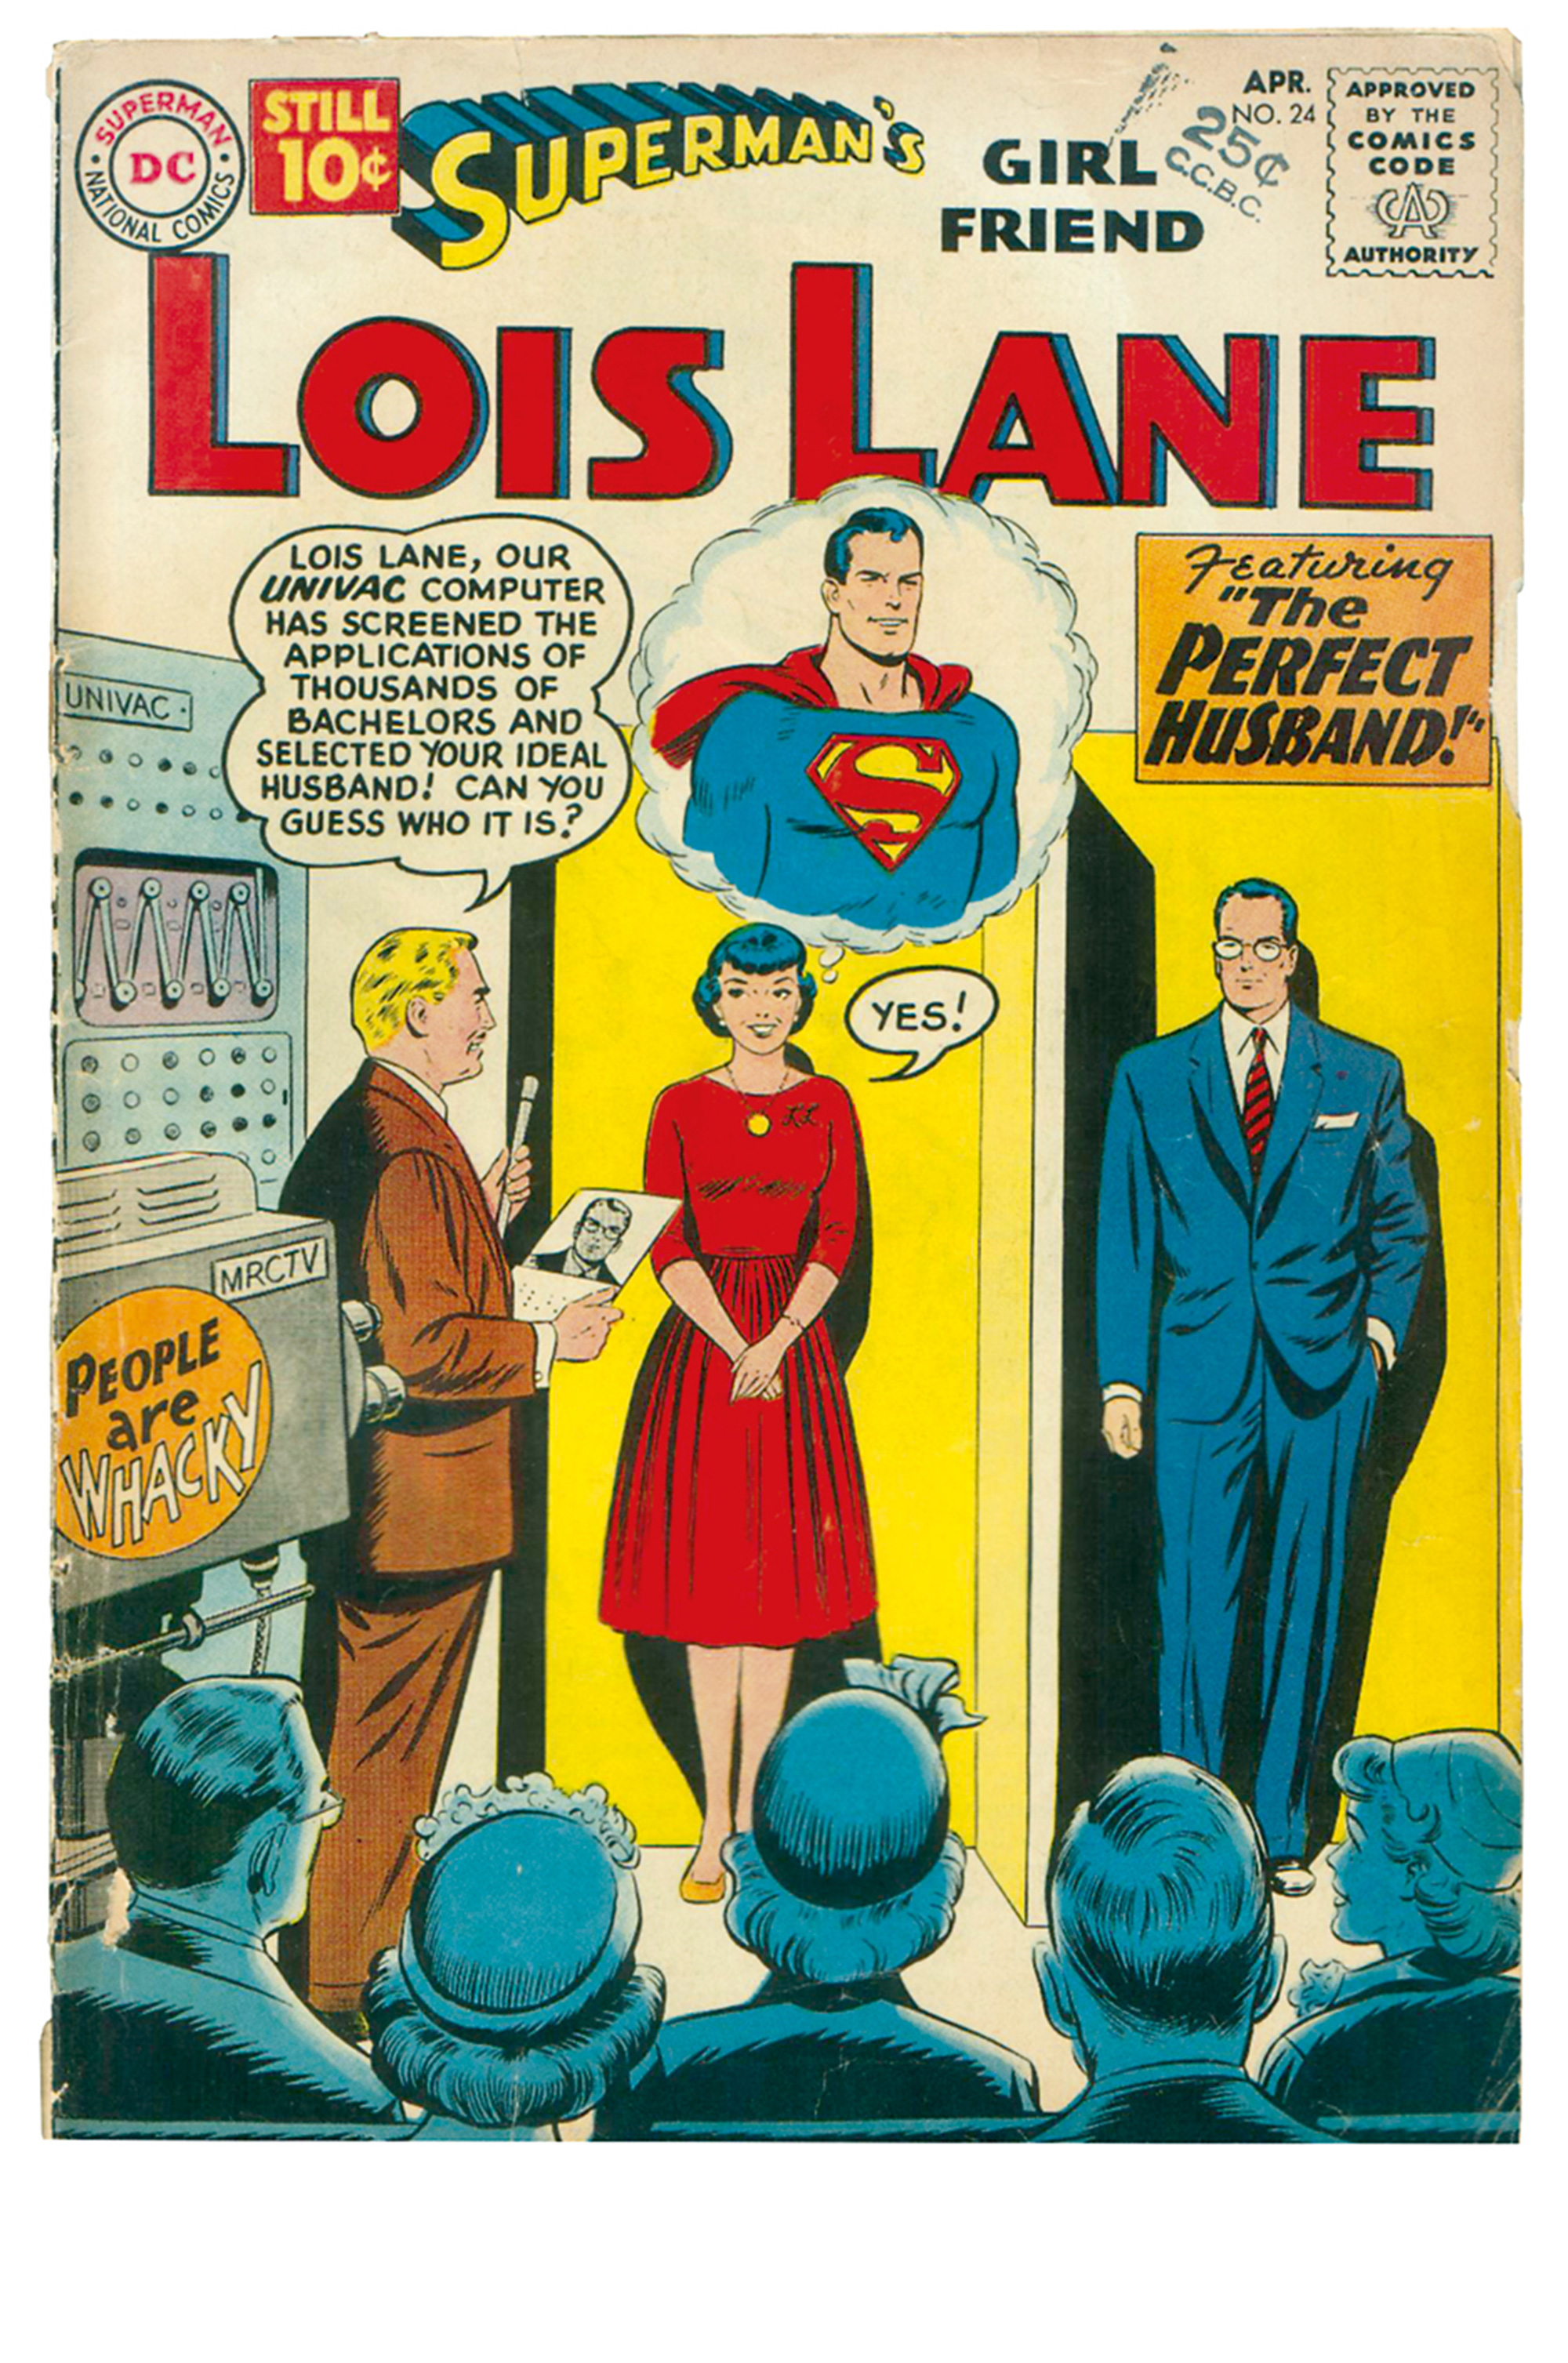 Cover of issue 24 of Superman’s Girl Friend, Lois Lane, 1961